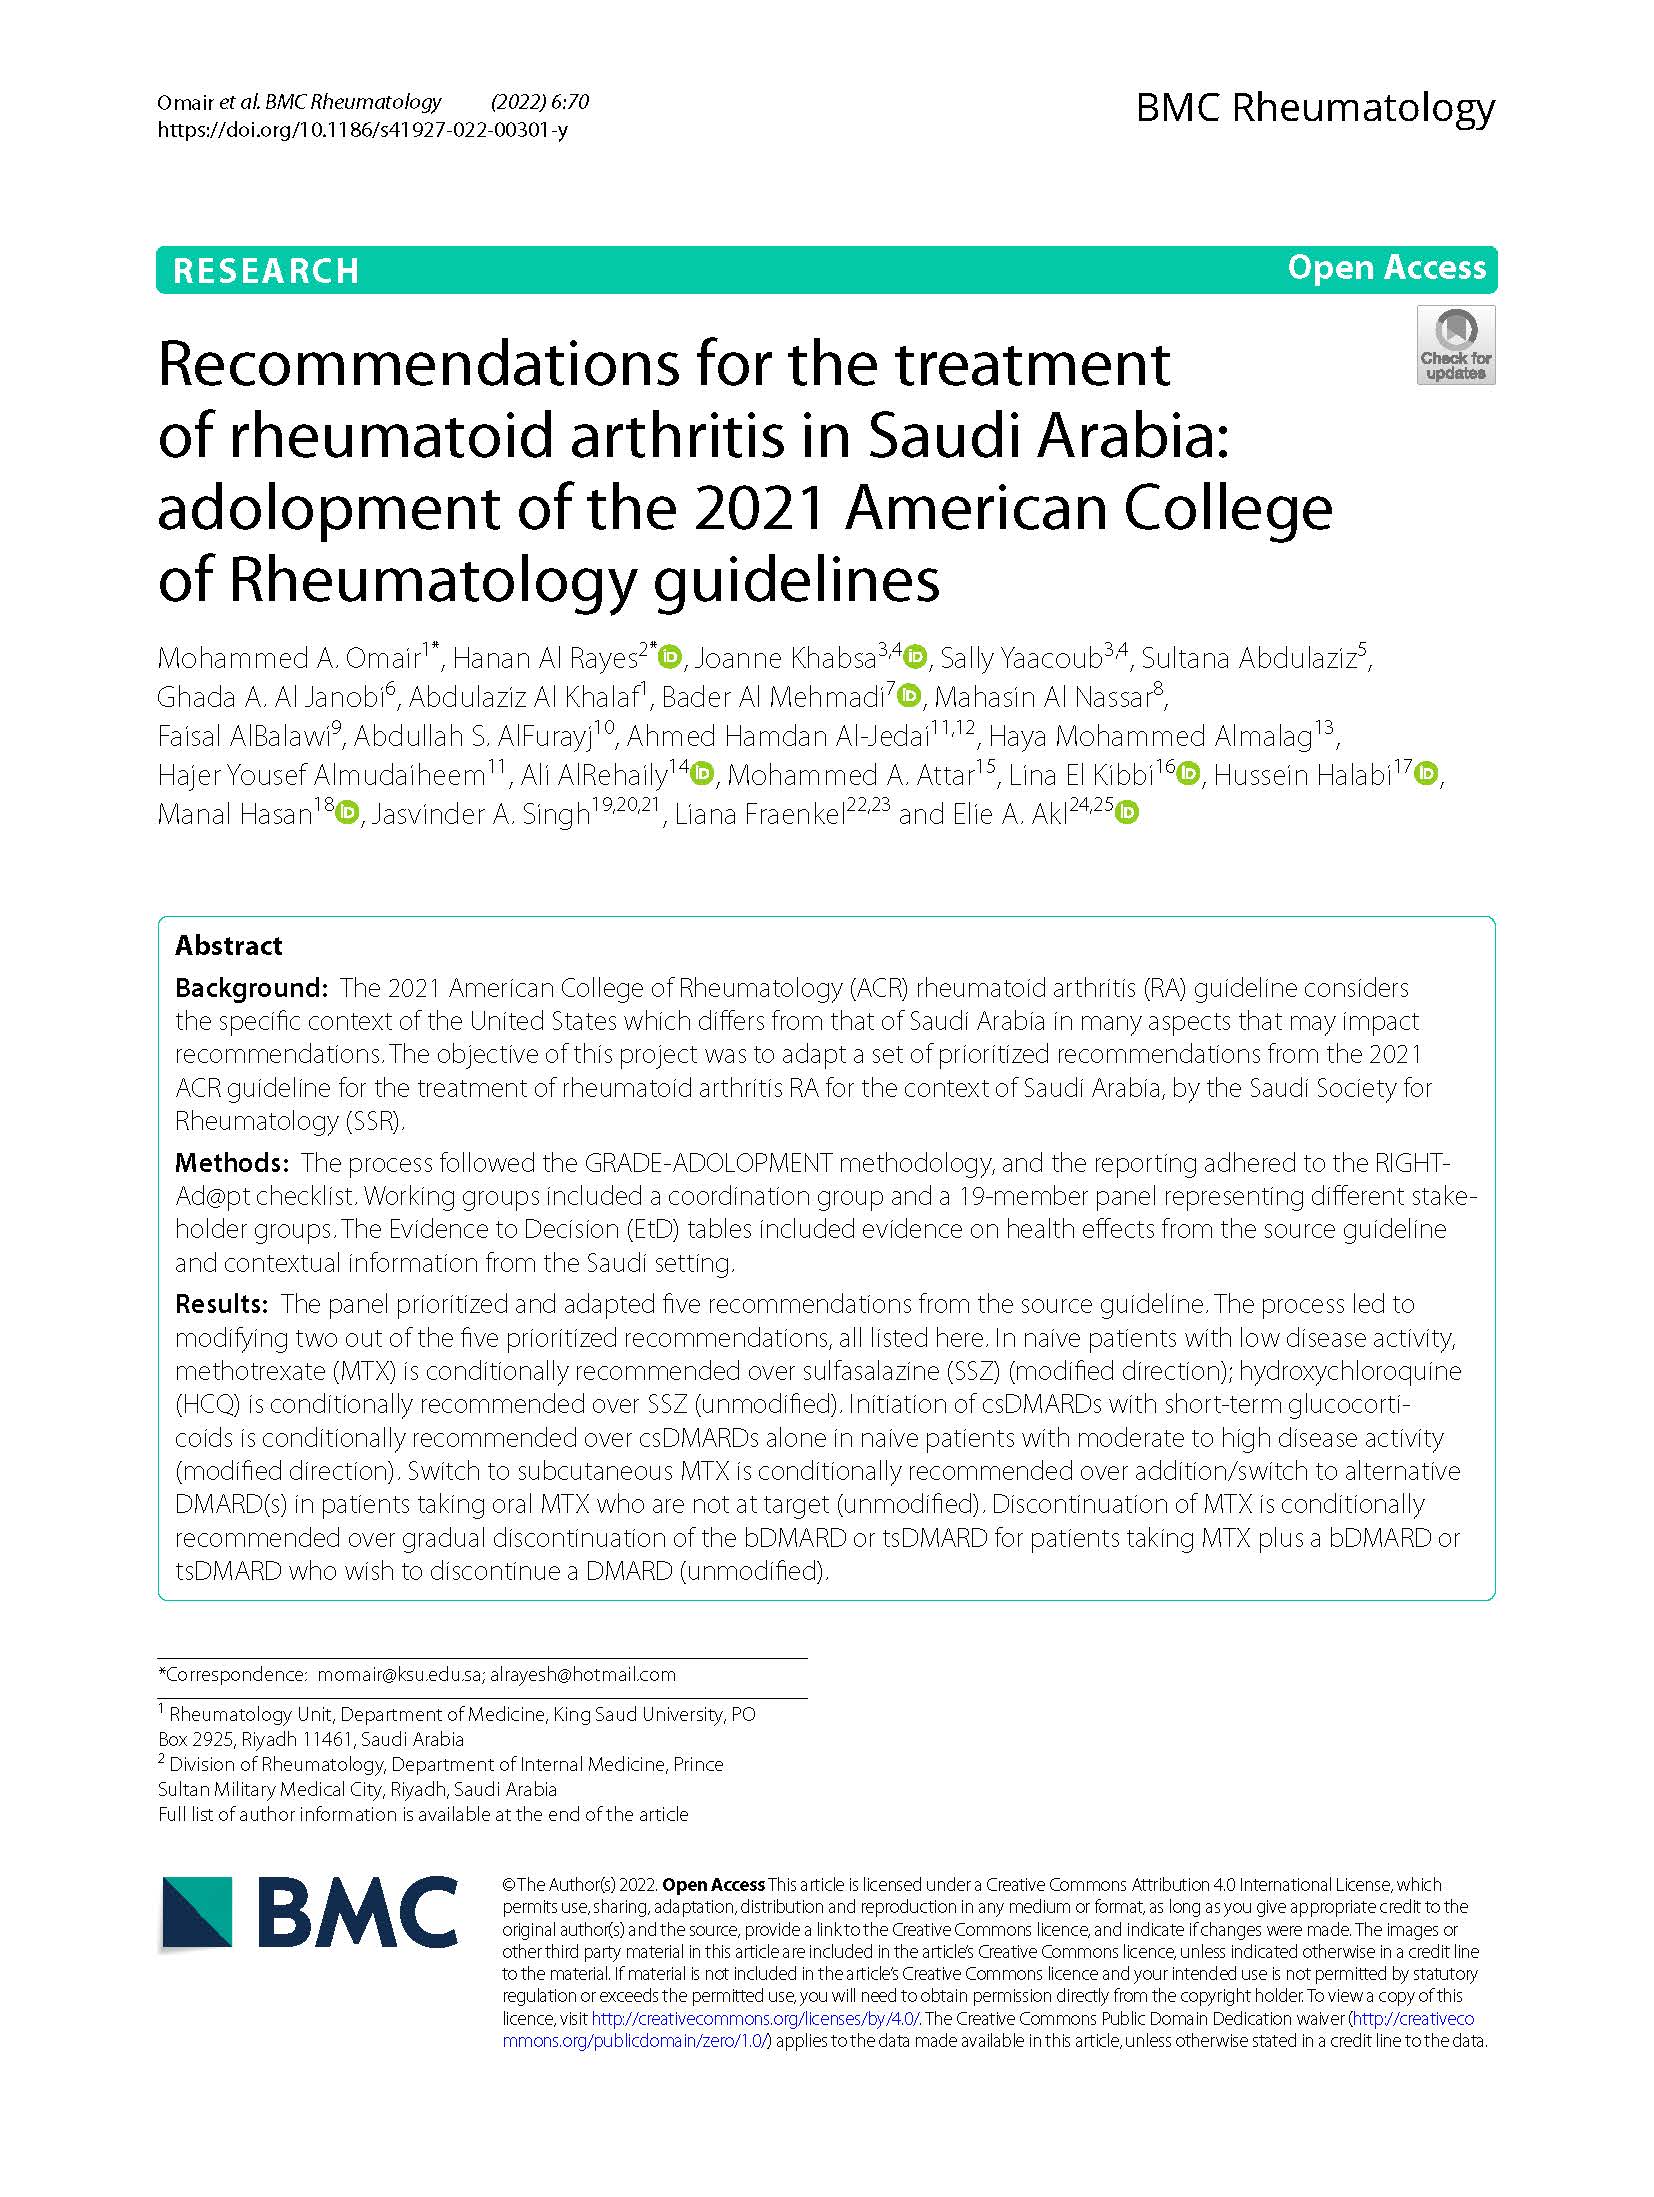 Recommendations for the treatment of rheumatoid arthritis in Saudi Arabia: adolopment of the 2021 American College of Rheumatology guidelines